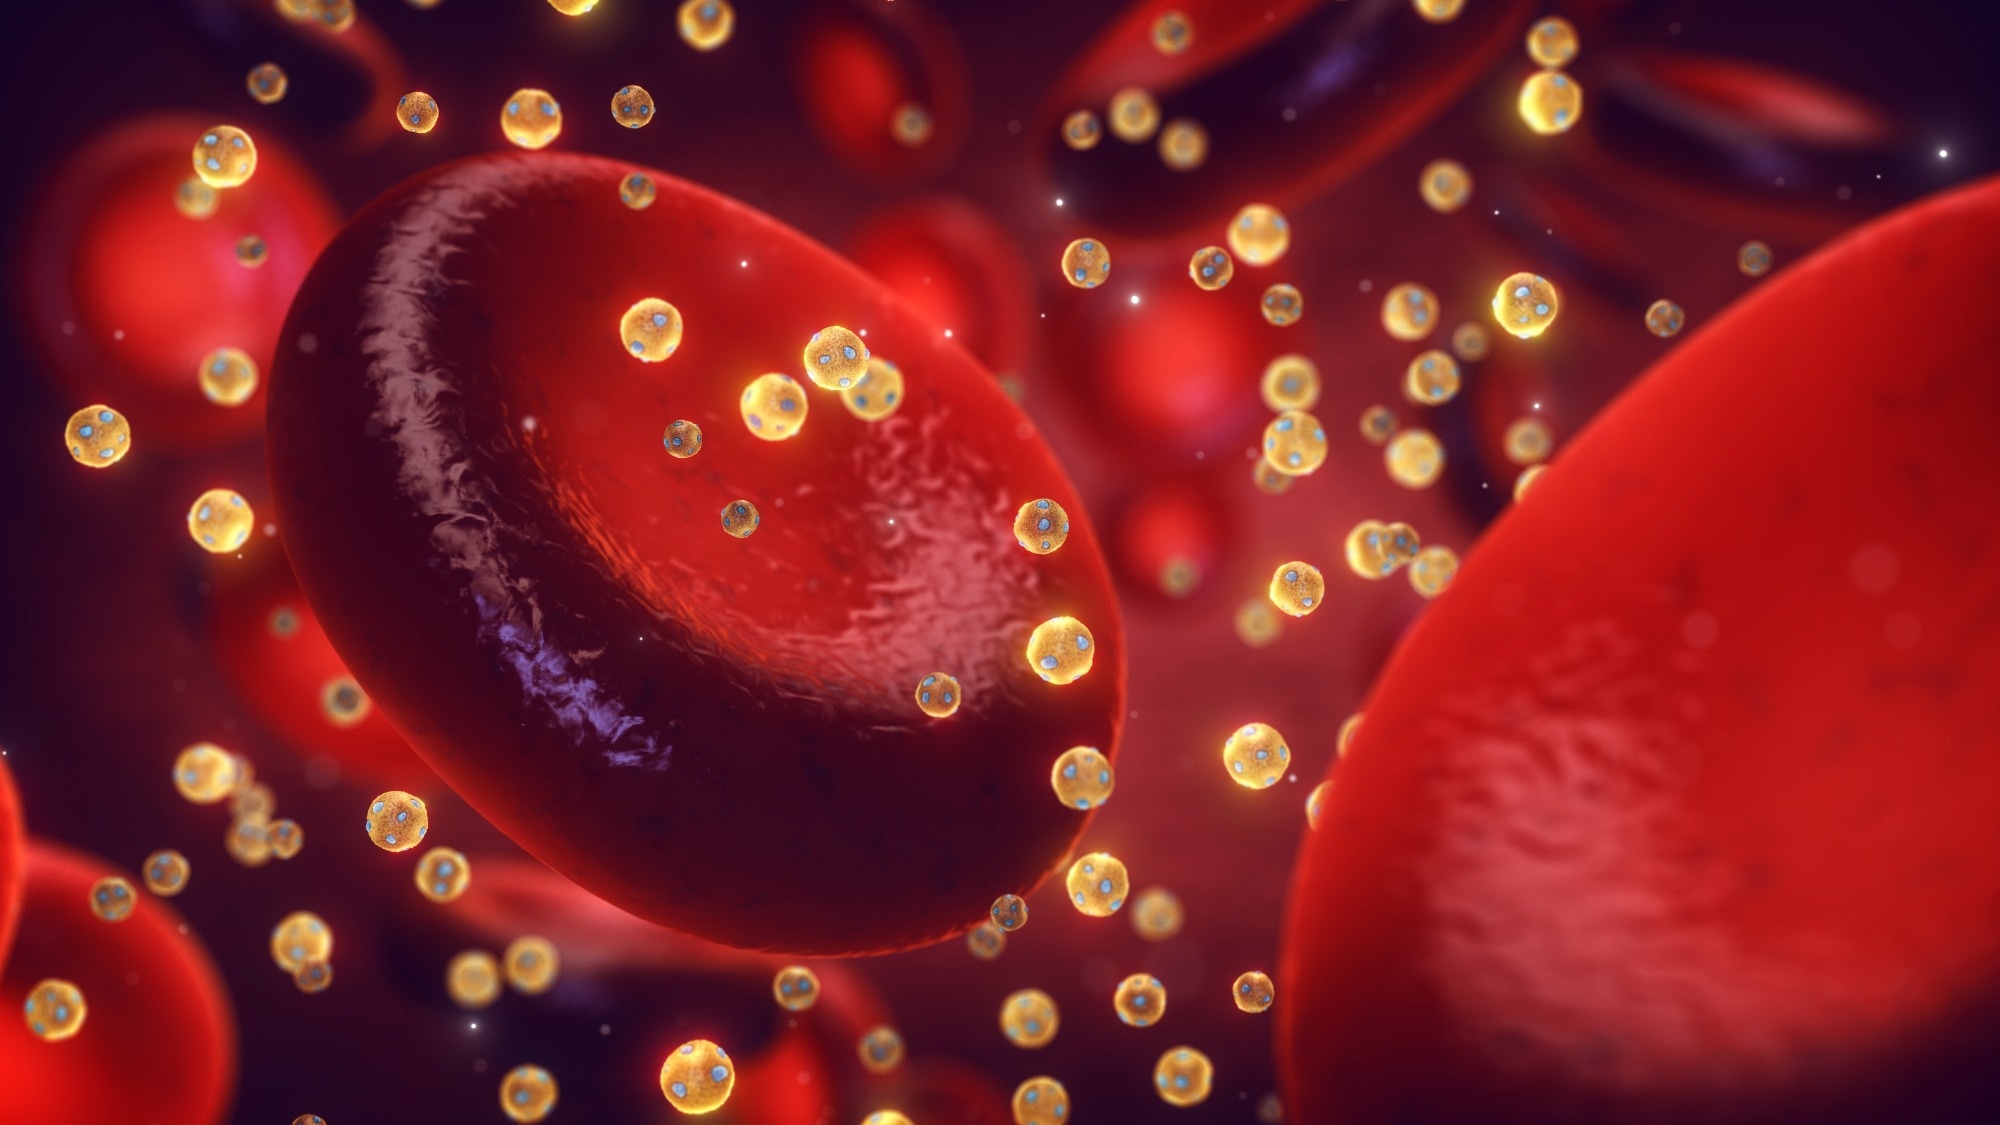 High HDL-C levels and cardiovascular risks